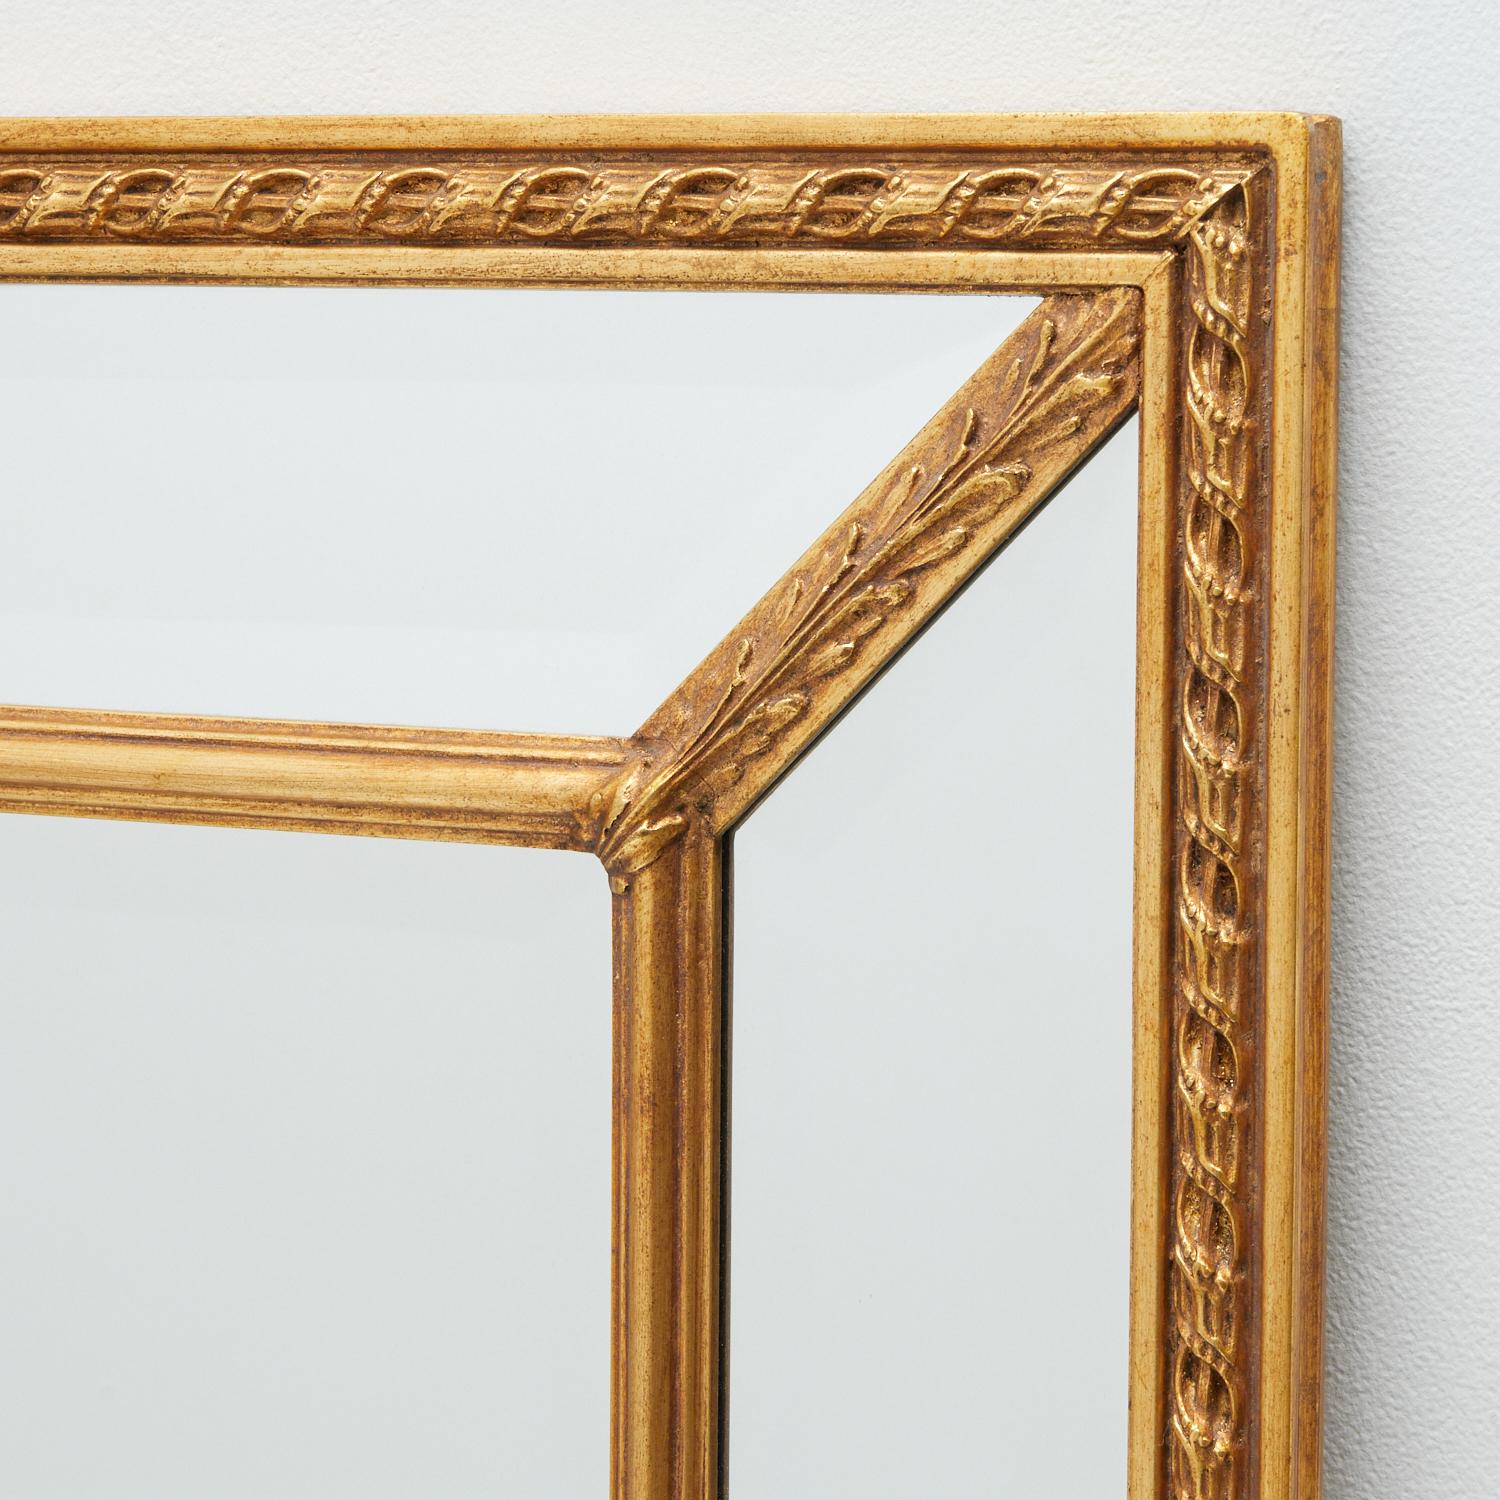 Late 20th c., American Carvers' Guild mirror style #1204. This double frame, combed and linked by acanthus frets, forms a striking linear pattern. Canted and beveled side panels, a beveled central panel, and an antique gold leaf finish make it